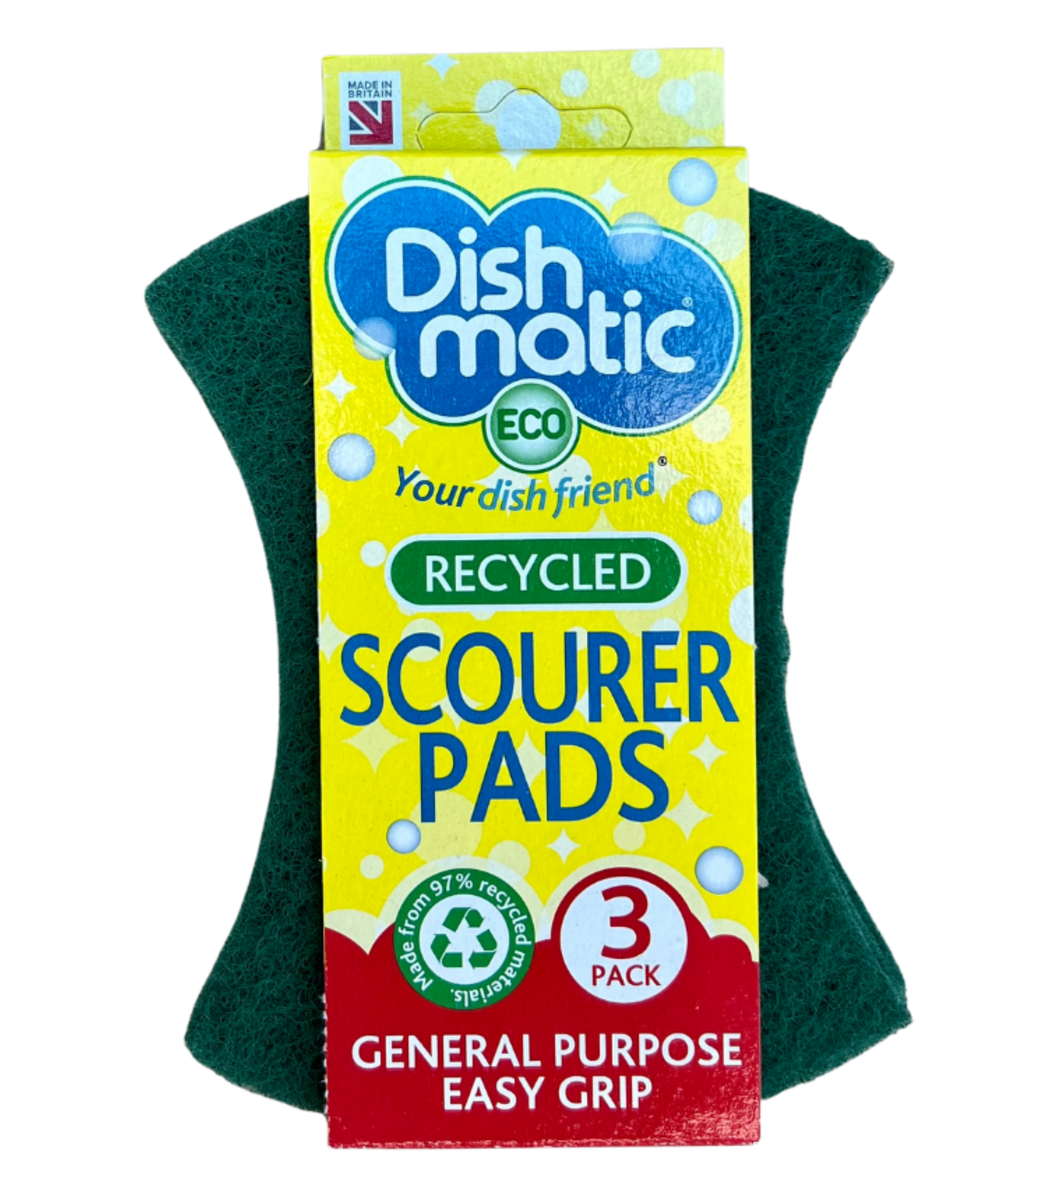 Dishmatic ECO General Purpose Recycled Scourer Pads 3 Pack